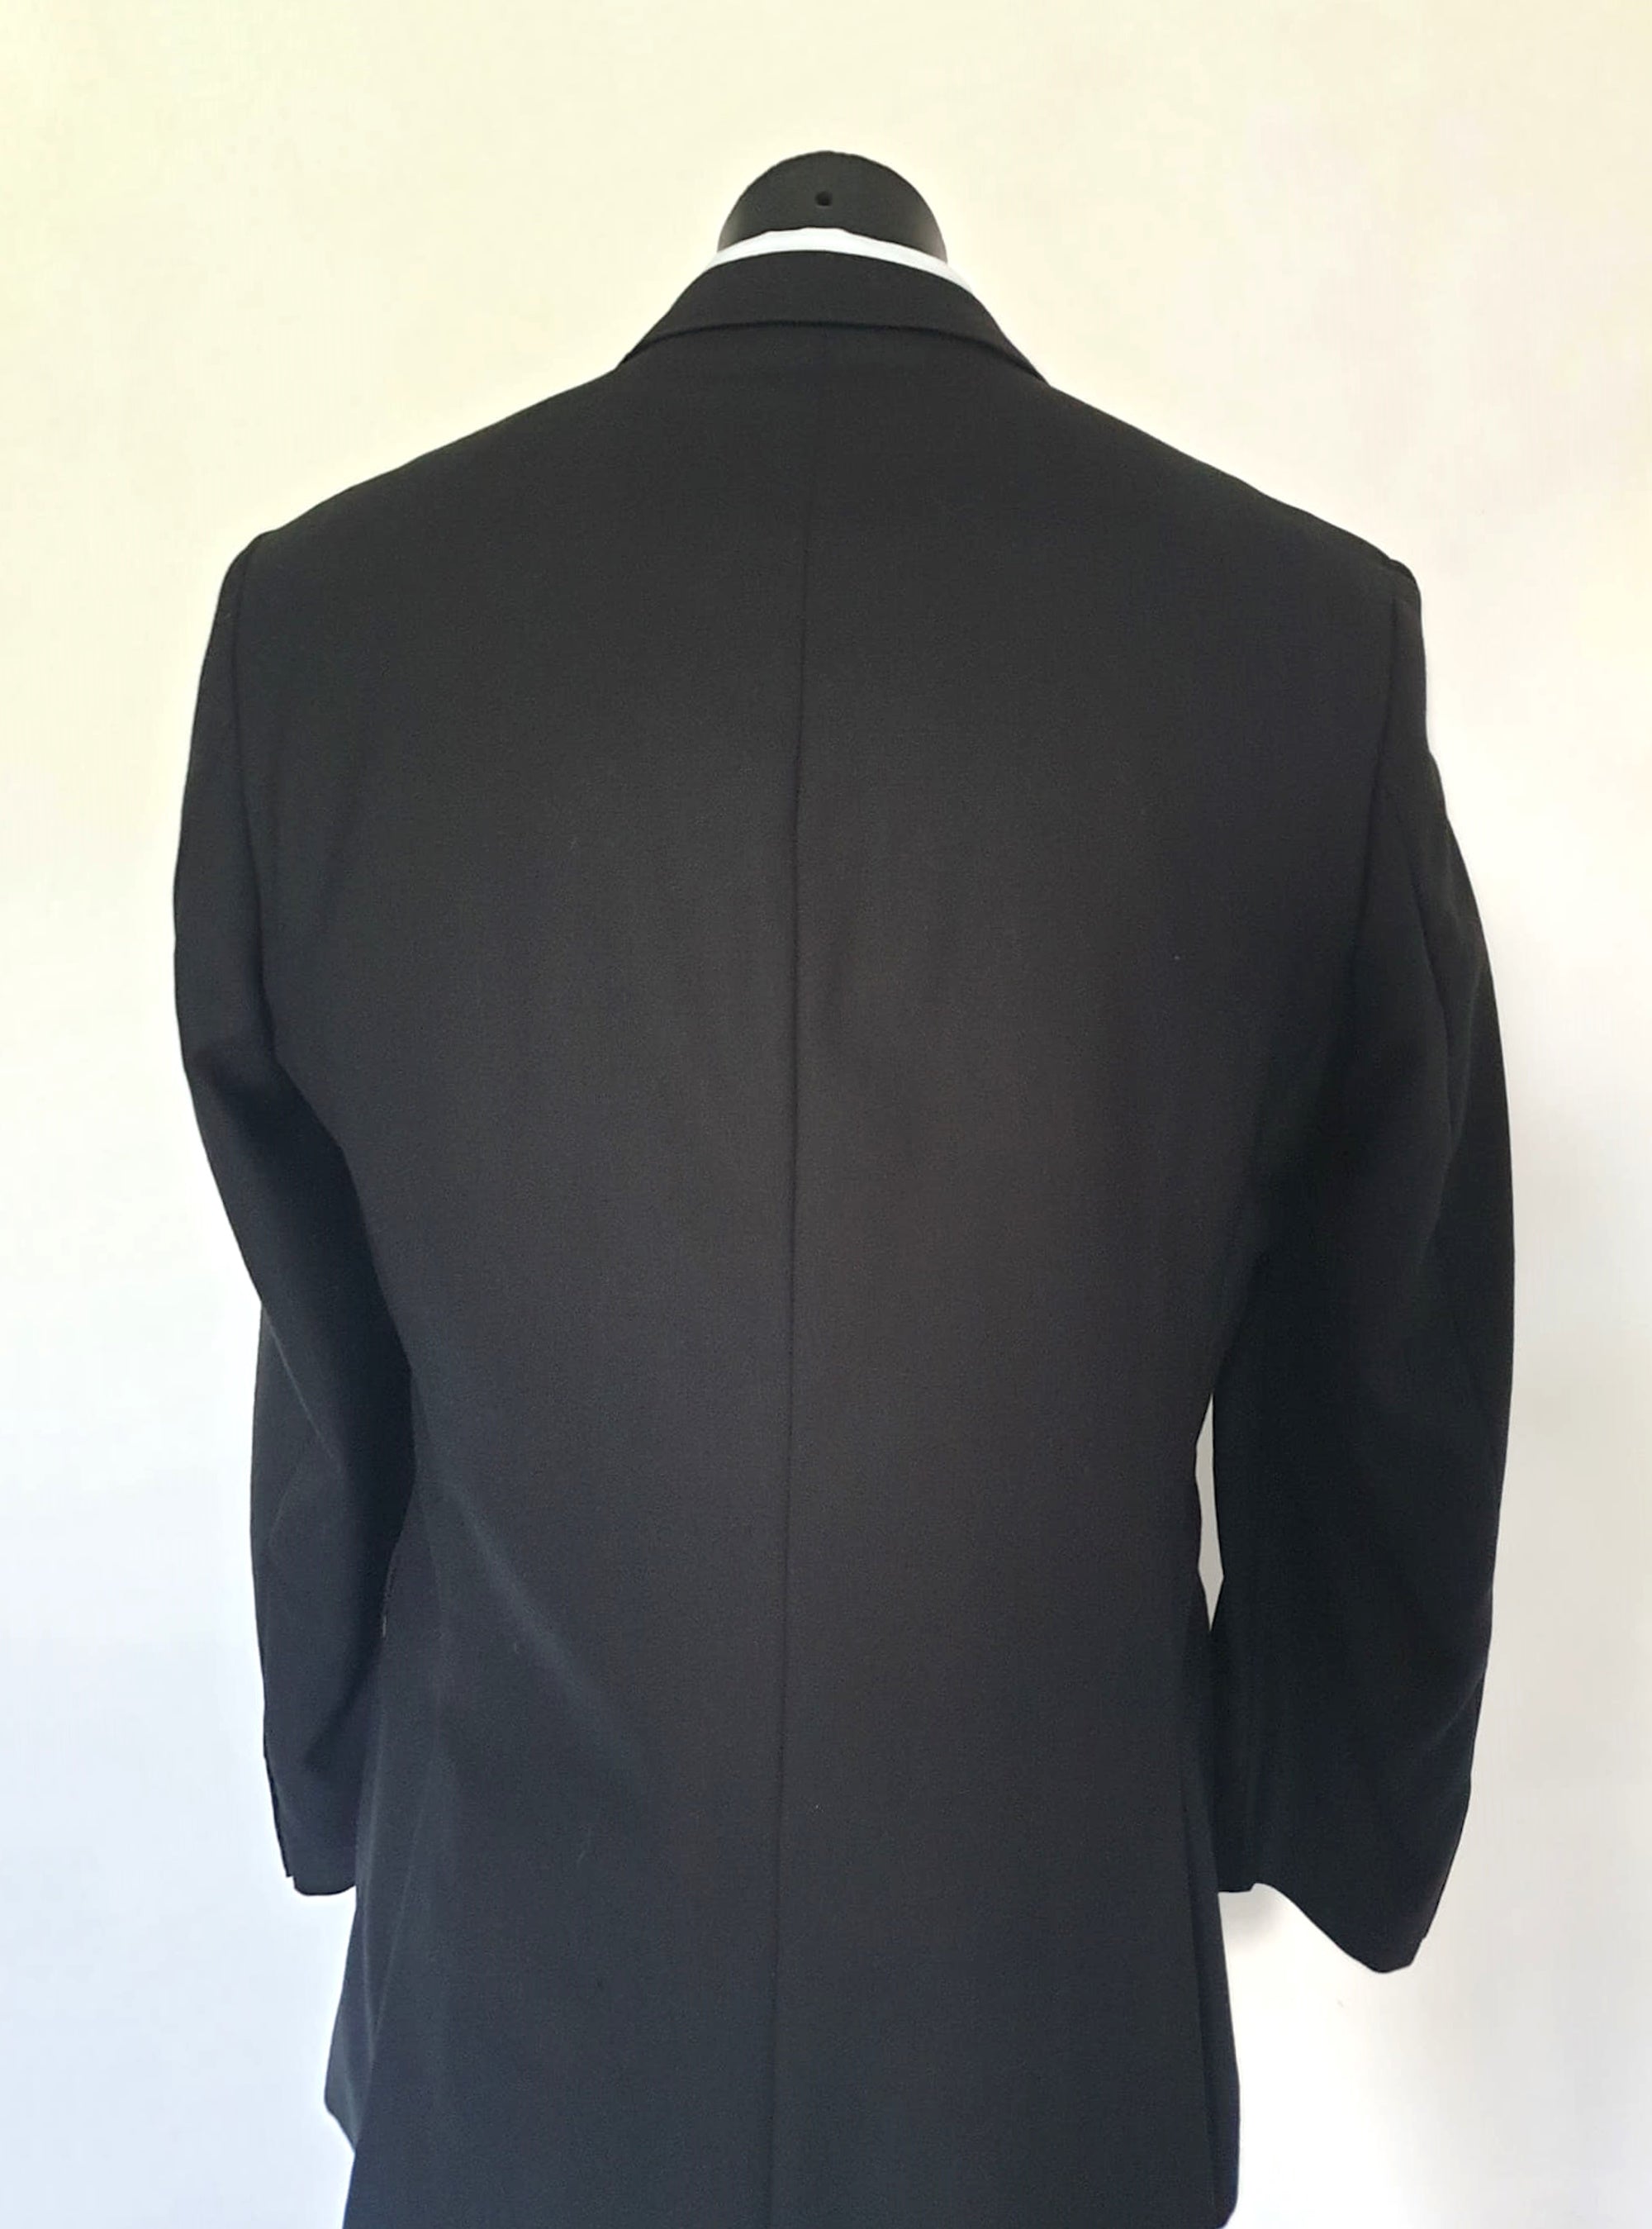 vintage savile row black wool jacket with notched lapels size 102R